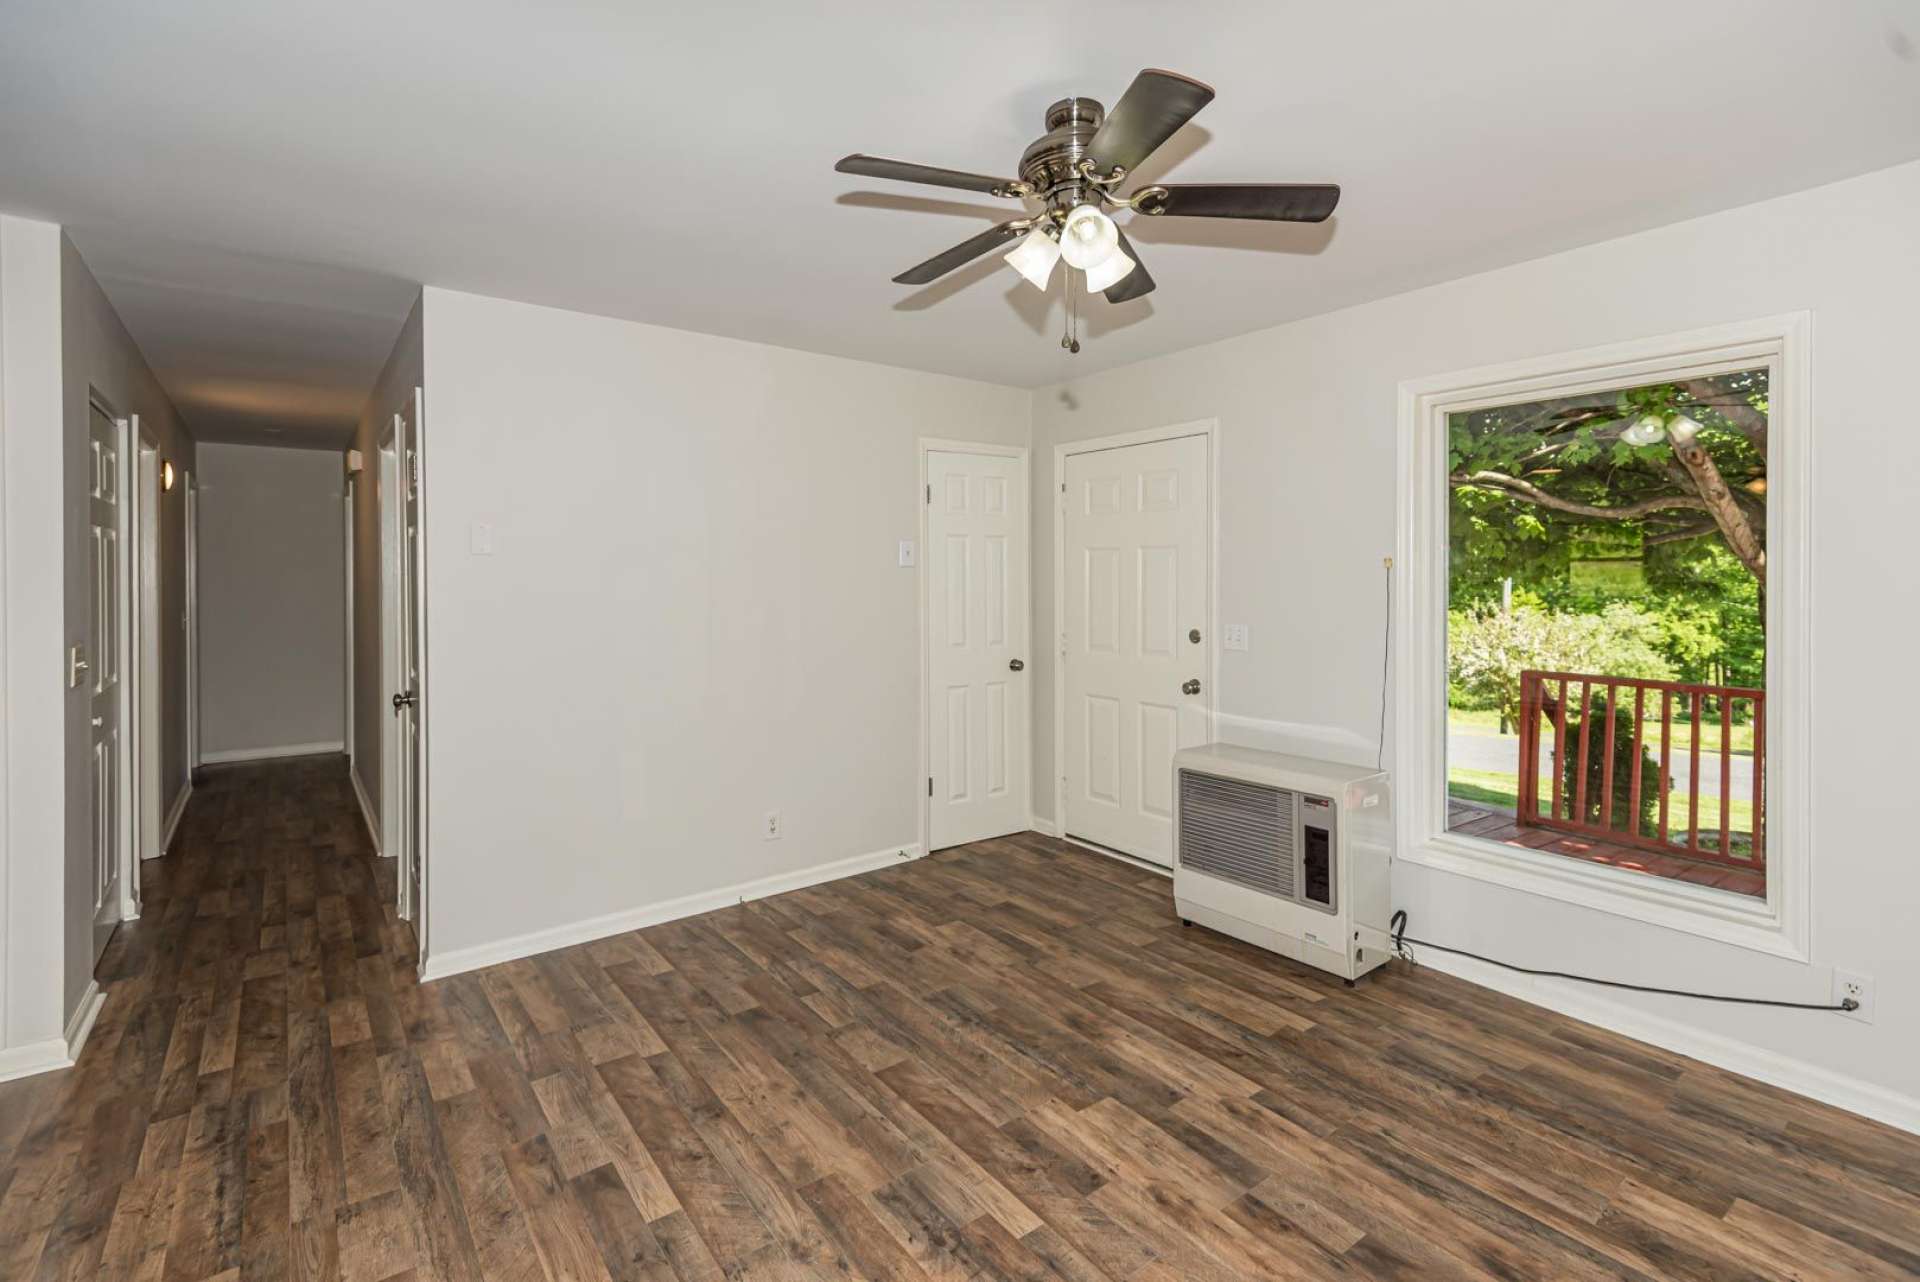 All new  floor covering, new paint,  tile and light fixtures throughout make this country home feel brand new. Notice the large window in the living area filling the home with natural light.